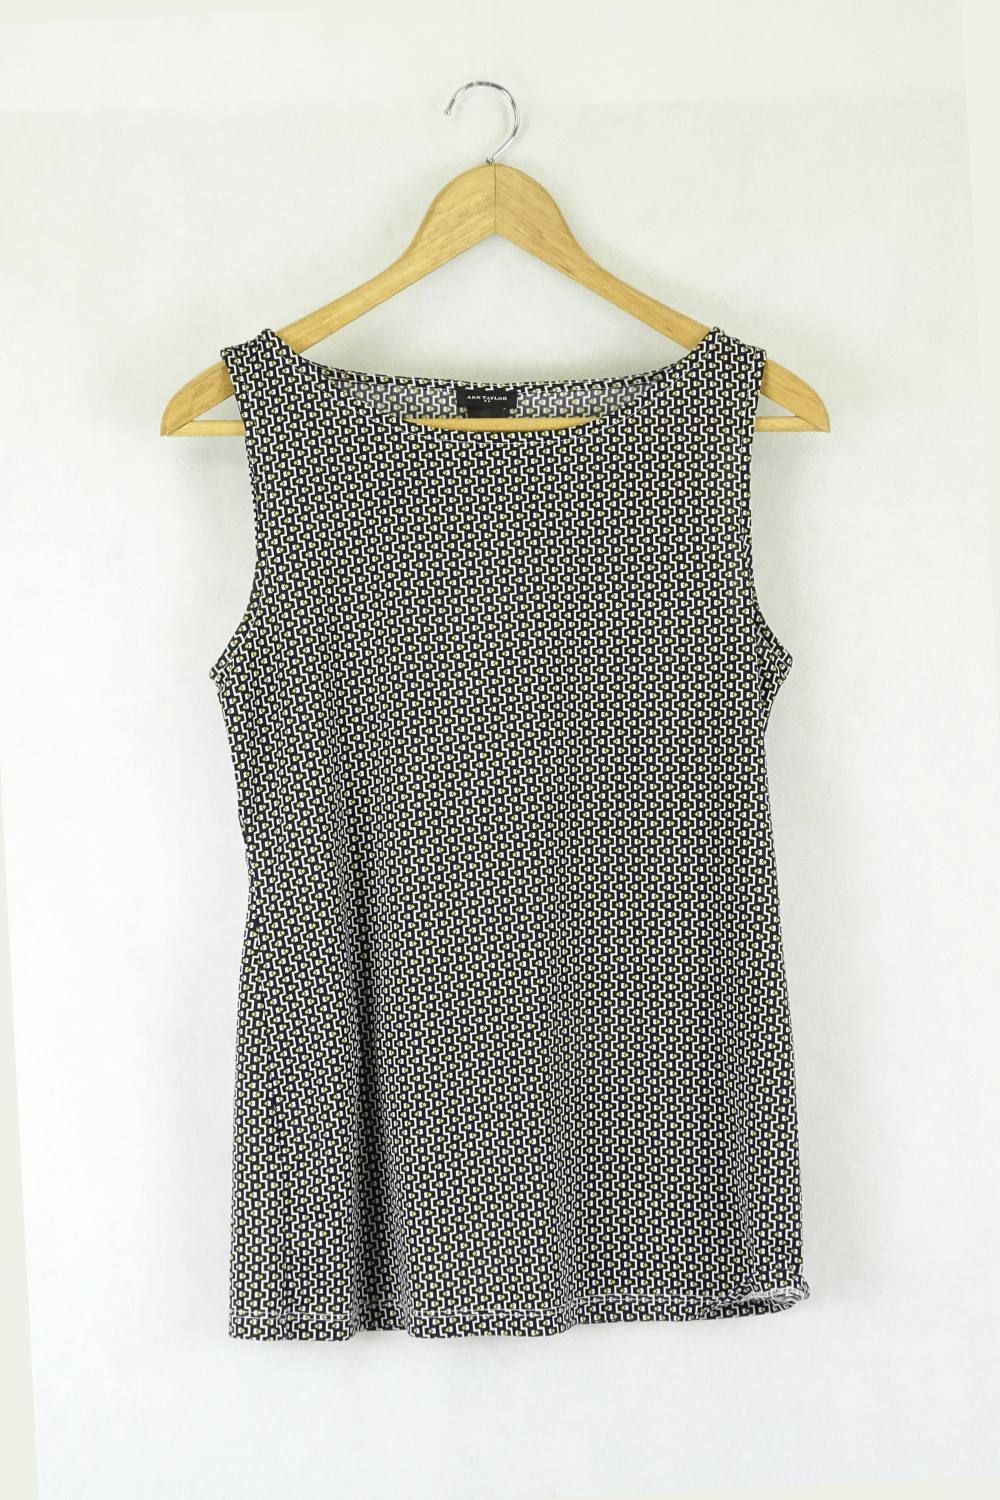 Anne Taylor Patterned Top Xs